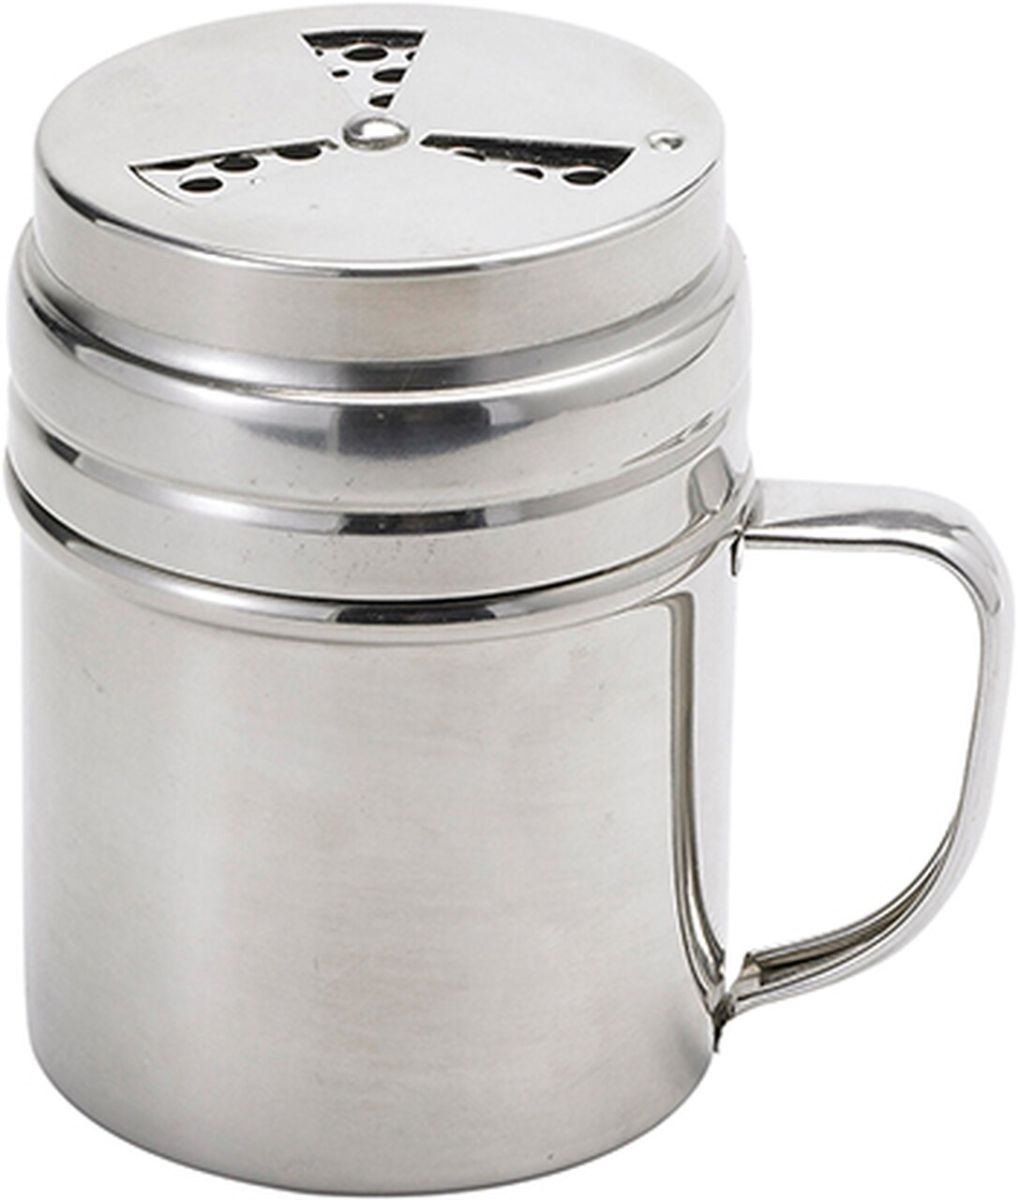 Picture of Harold Import 235718 Stainless Steel Rub Shaker Cup with Handle